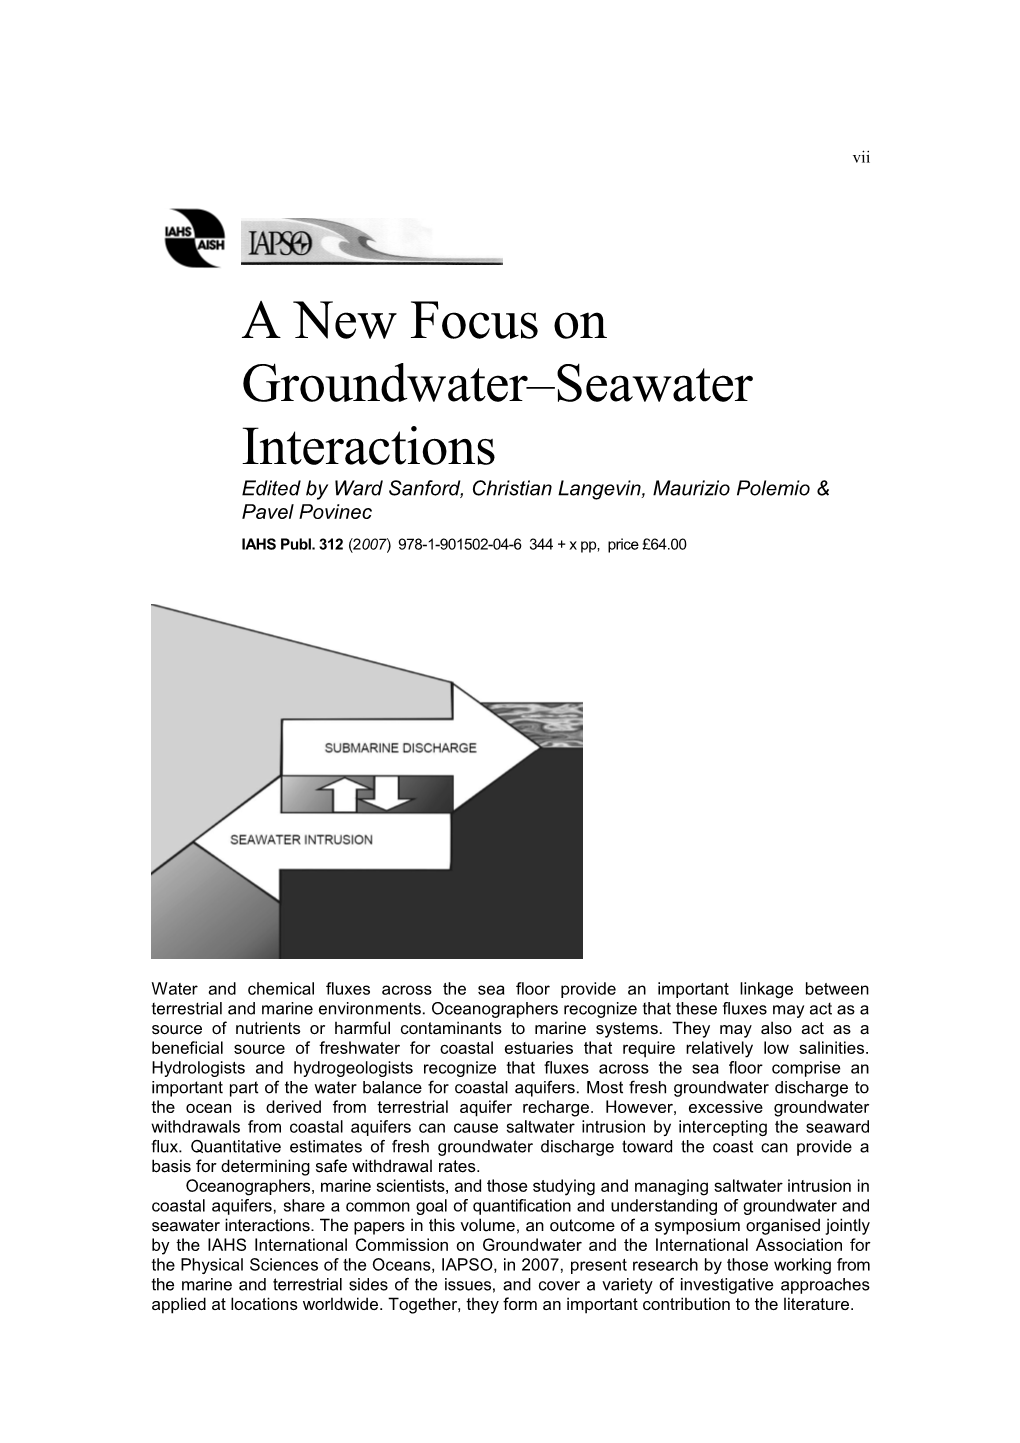 A New Focus on Groundwater Seawater Interactions (Proceedings of Symposium HS1001 at IUGG2007